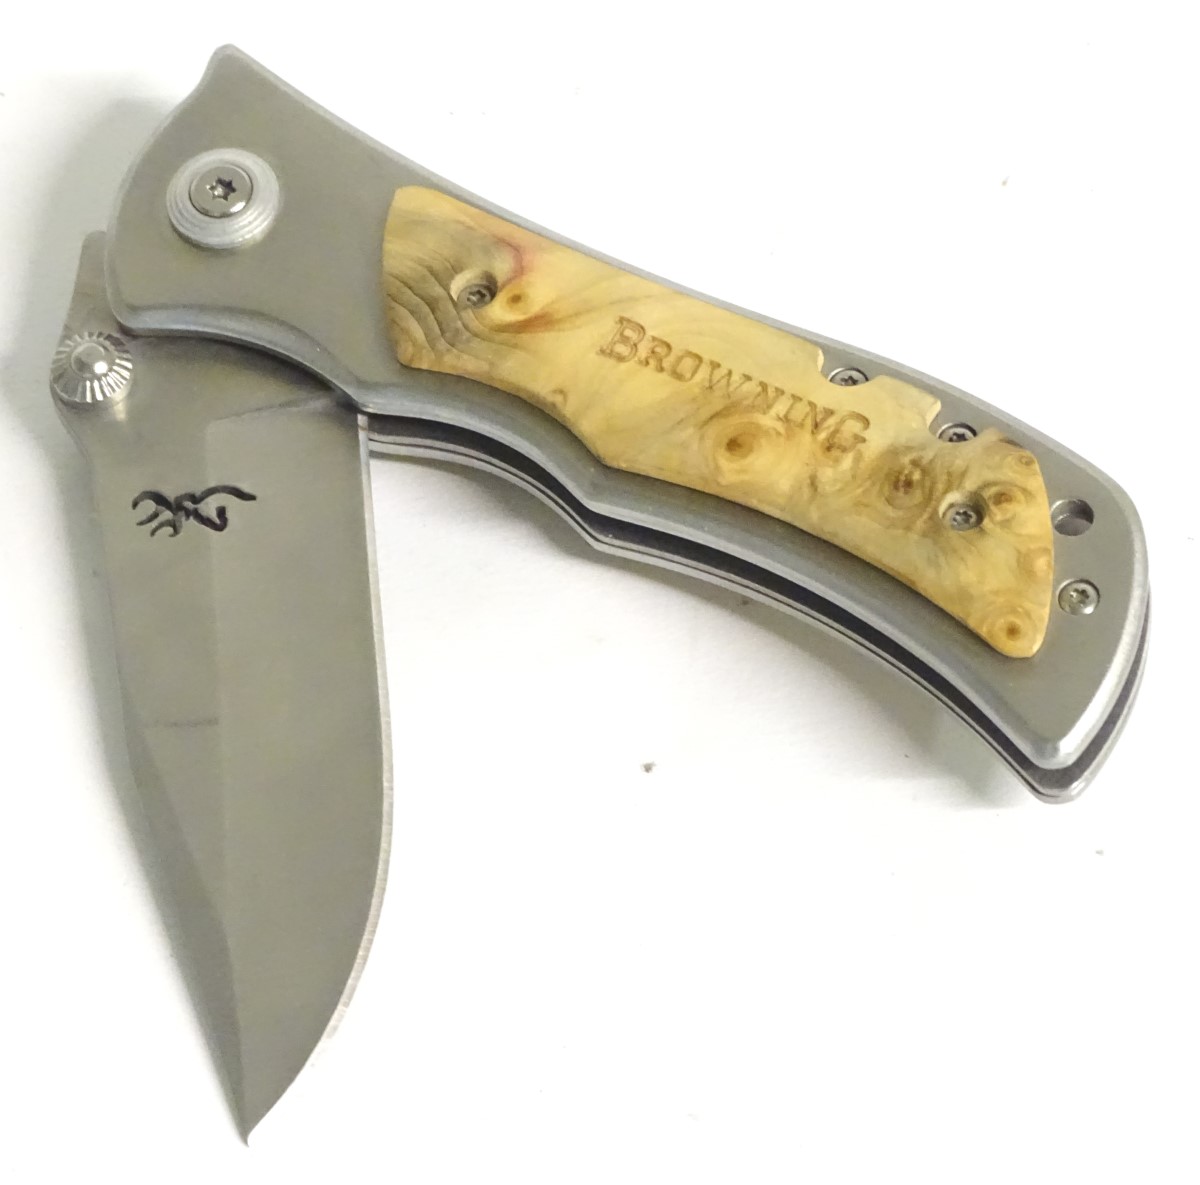 A Browning stainless steel skinning lock knife, with burr maple grips, - Image 7 of 9